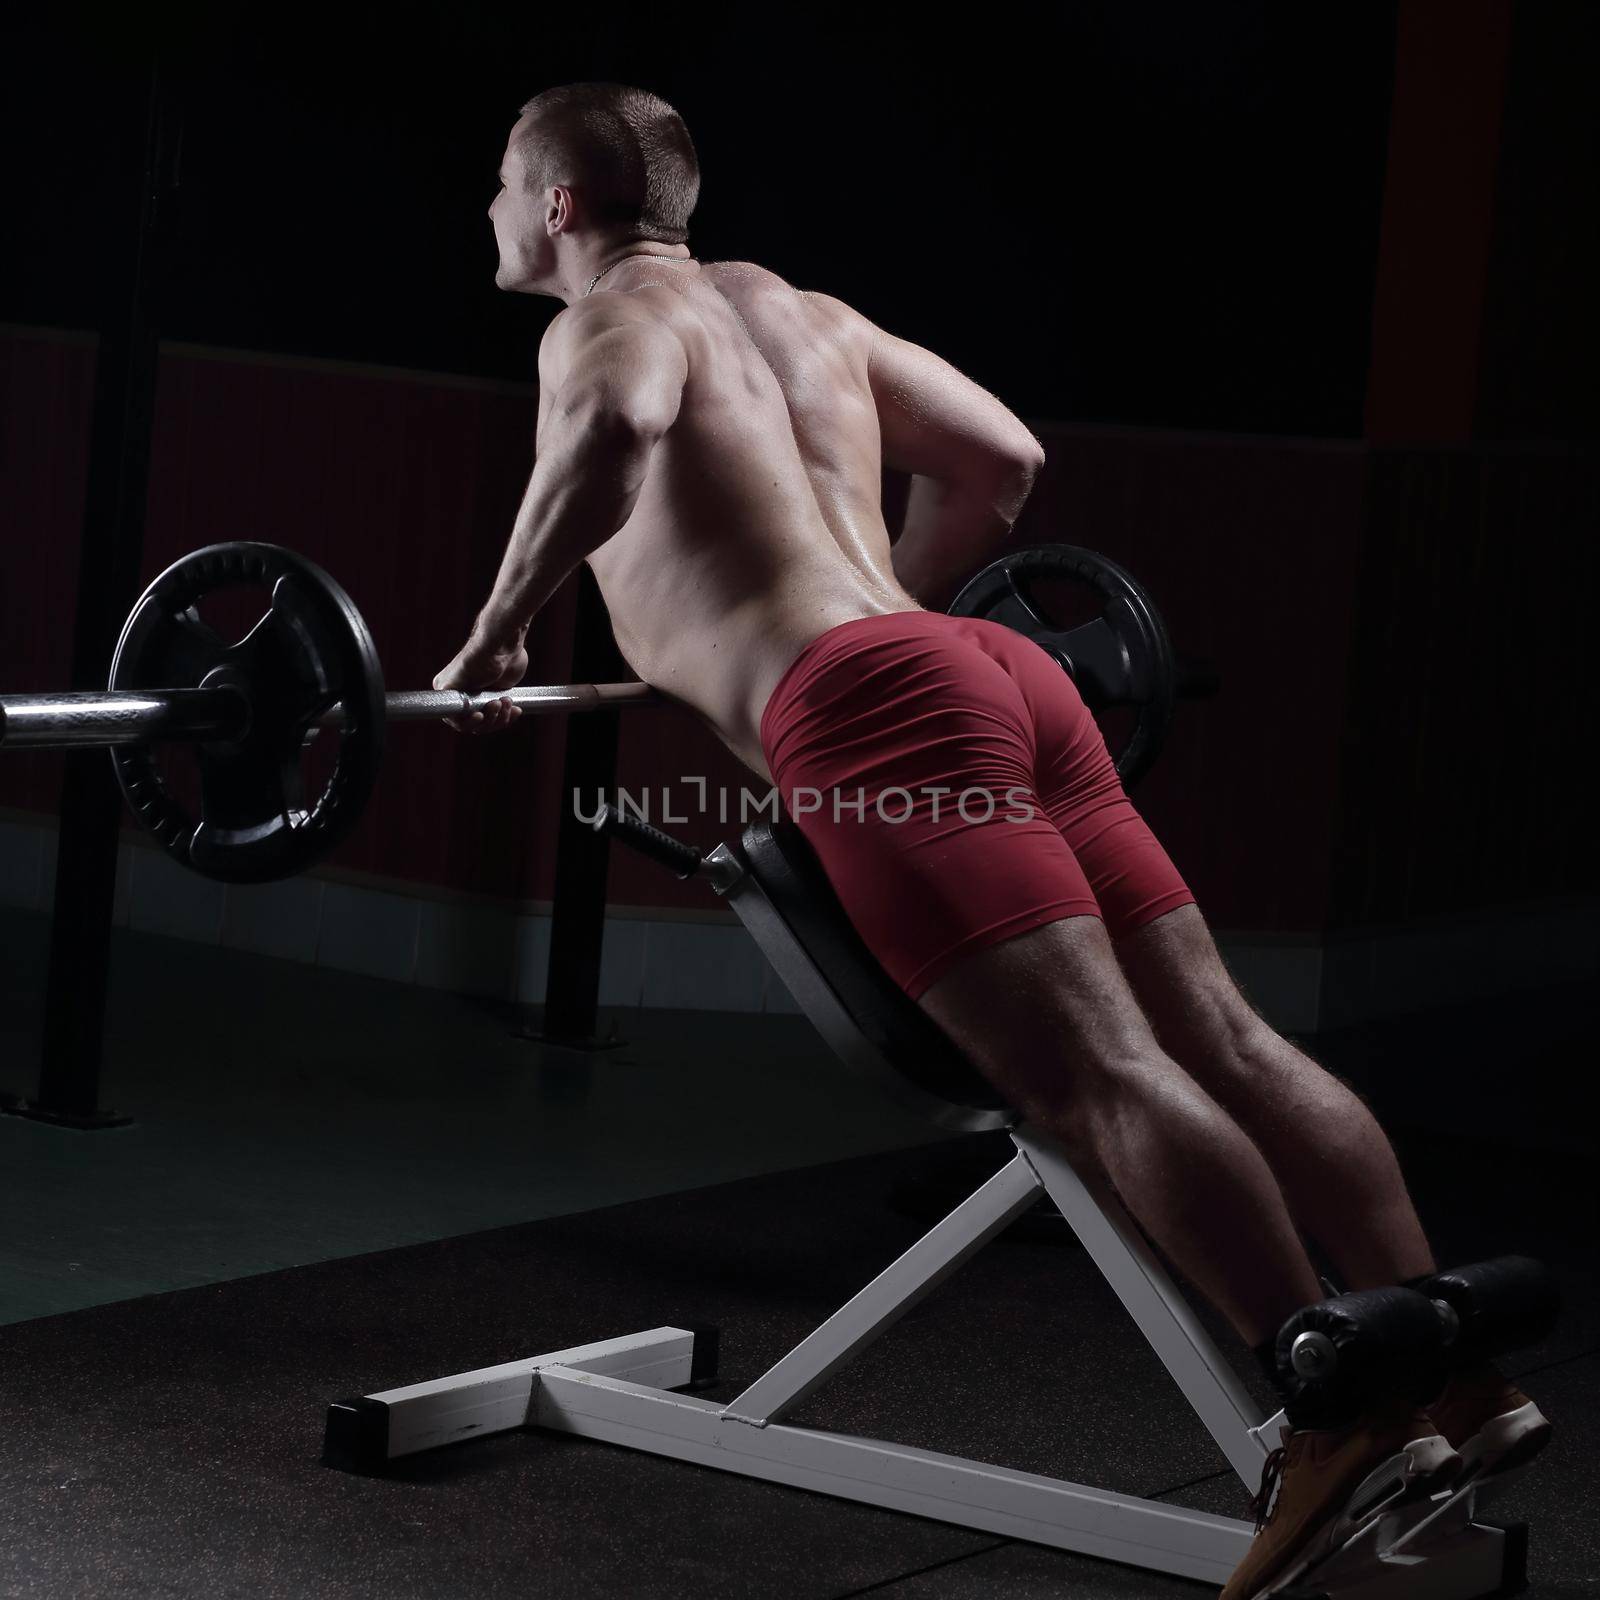 rear view .a man bodybuilder performs an exercise on the simulator by SmartPhotoLab